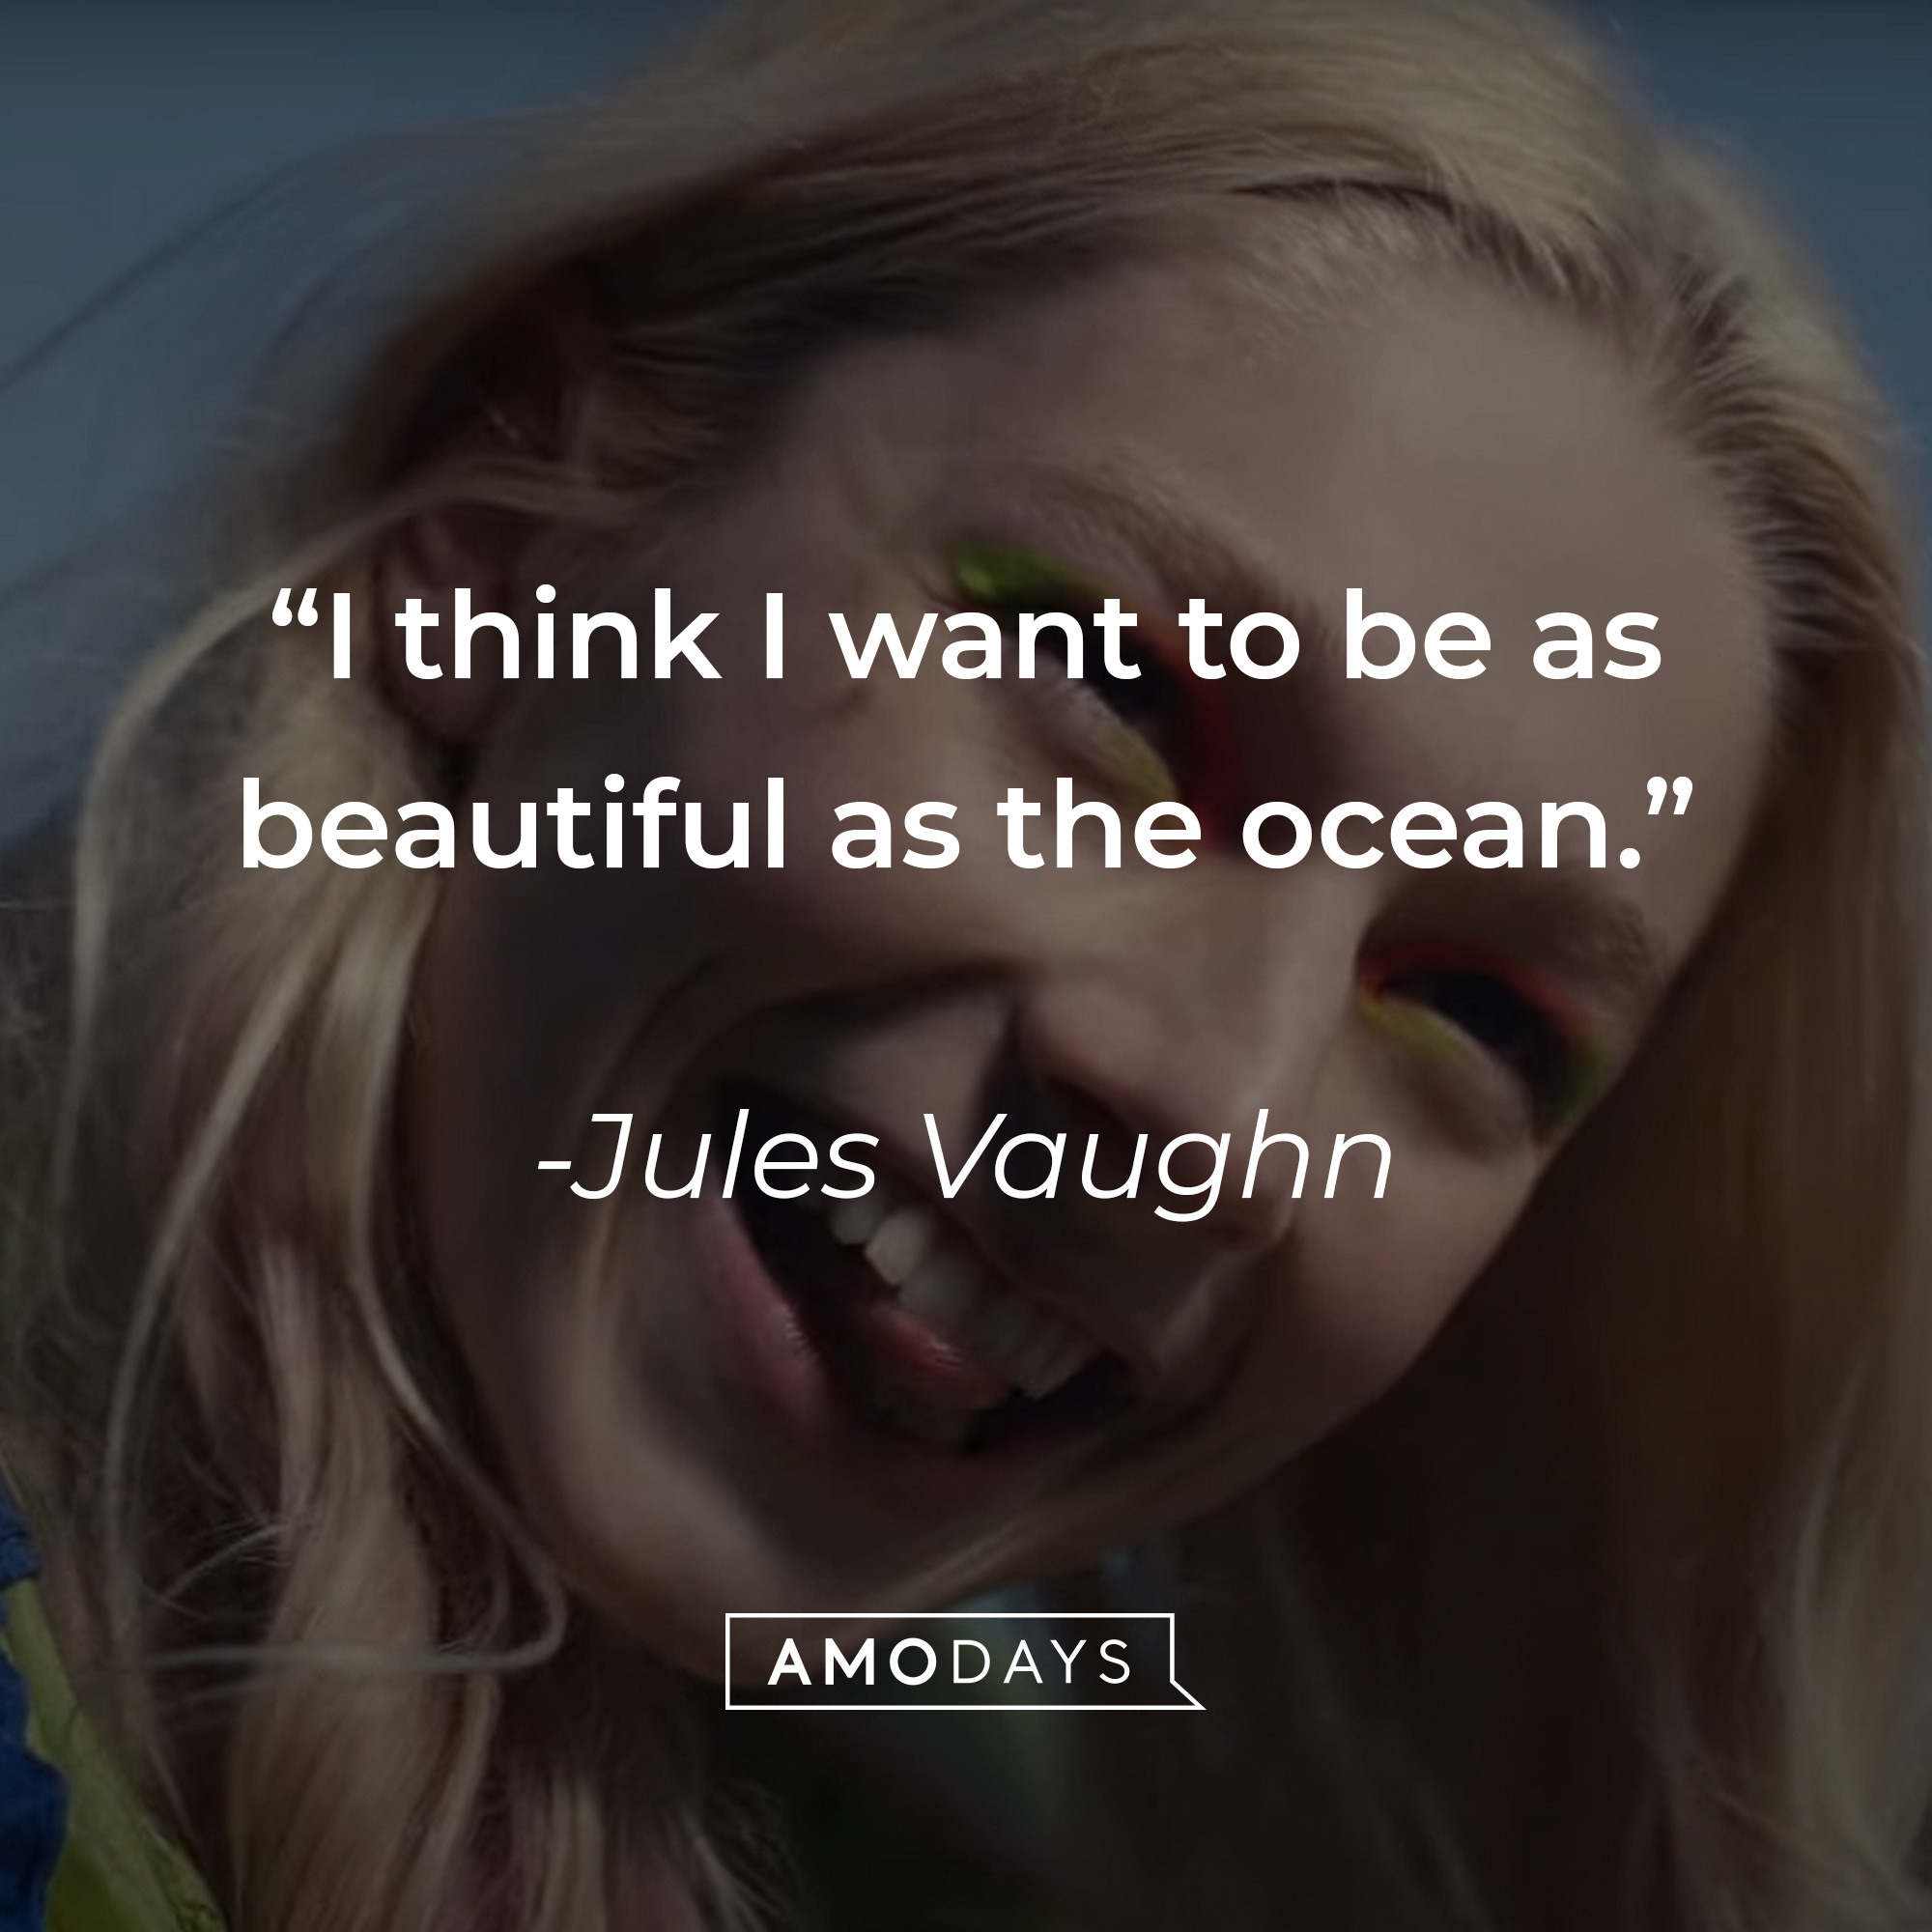 Jules Vaughn with her quote: "I think I want to be as beautiful as the ocean." | Source: HBO